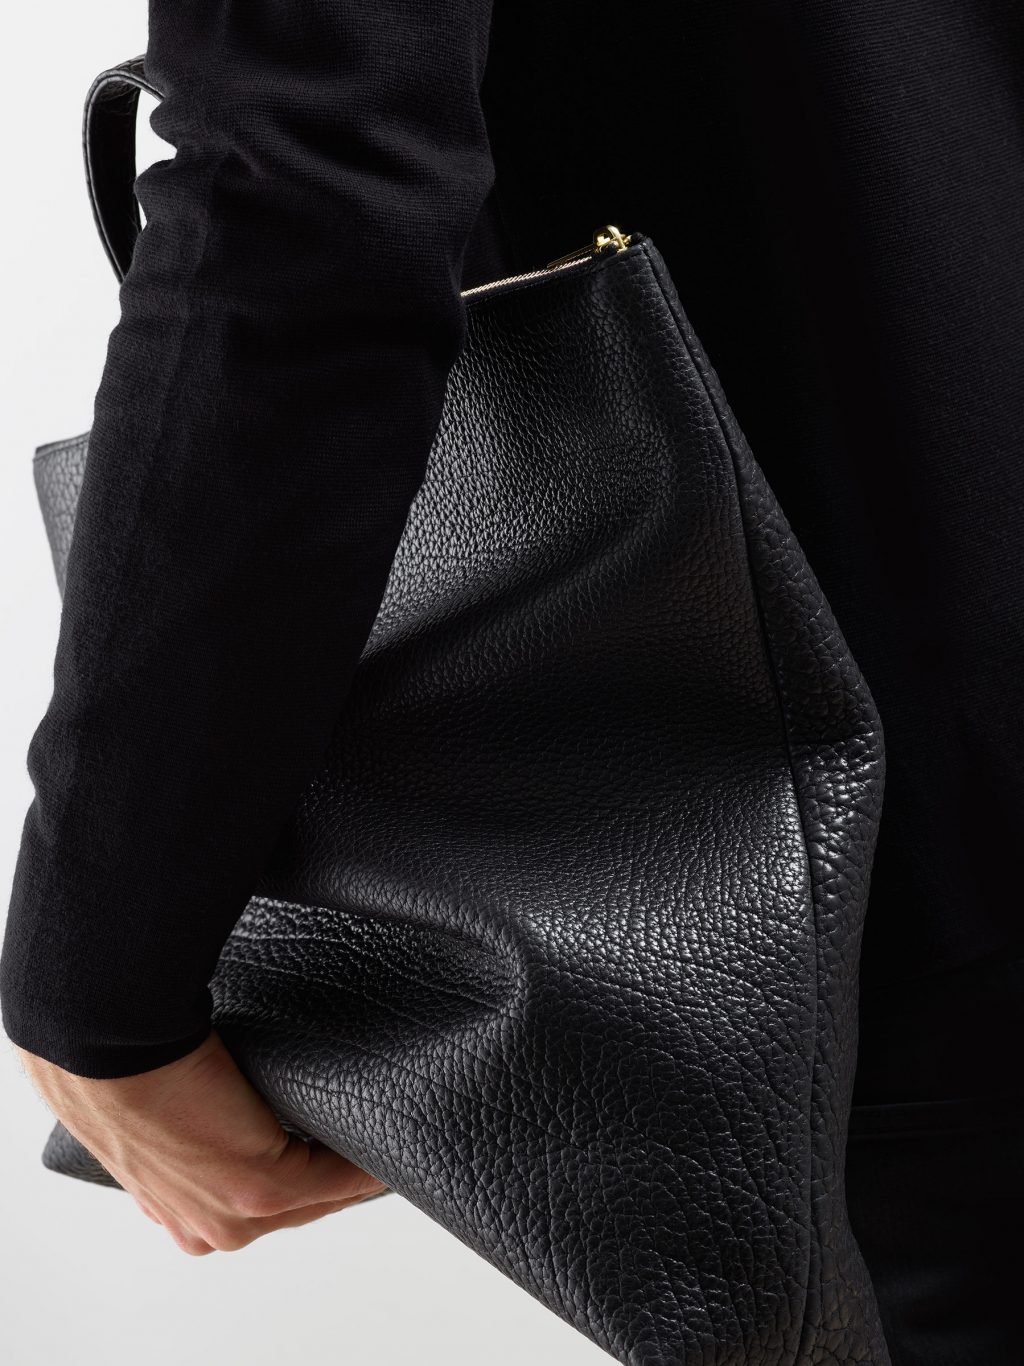 LUCID tote bag in black bison leather | TSATSAS